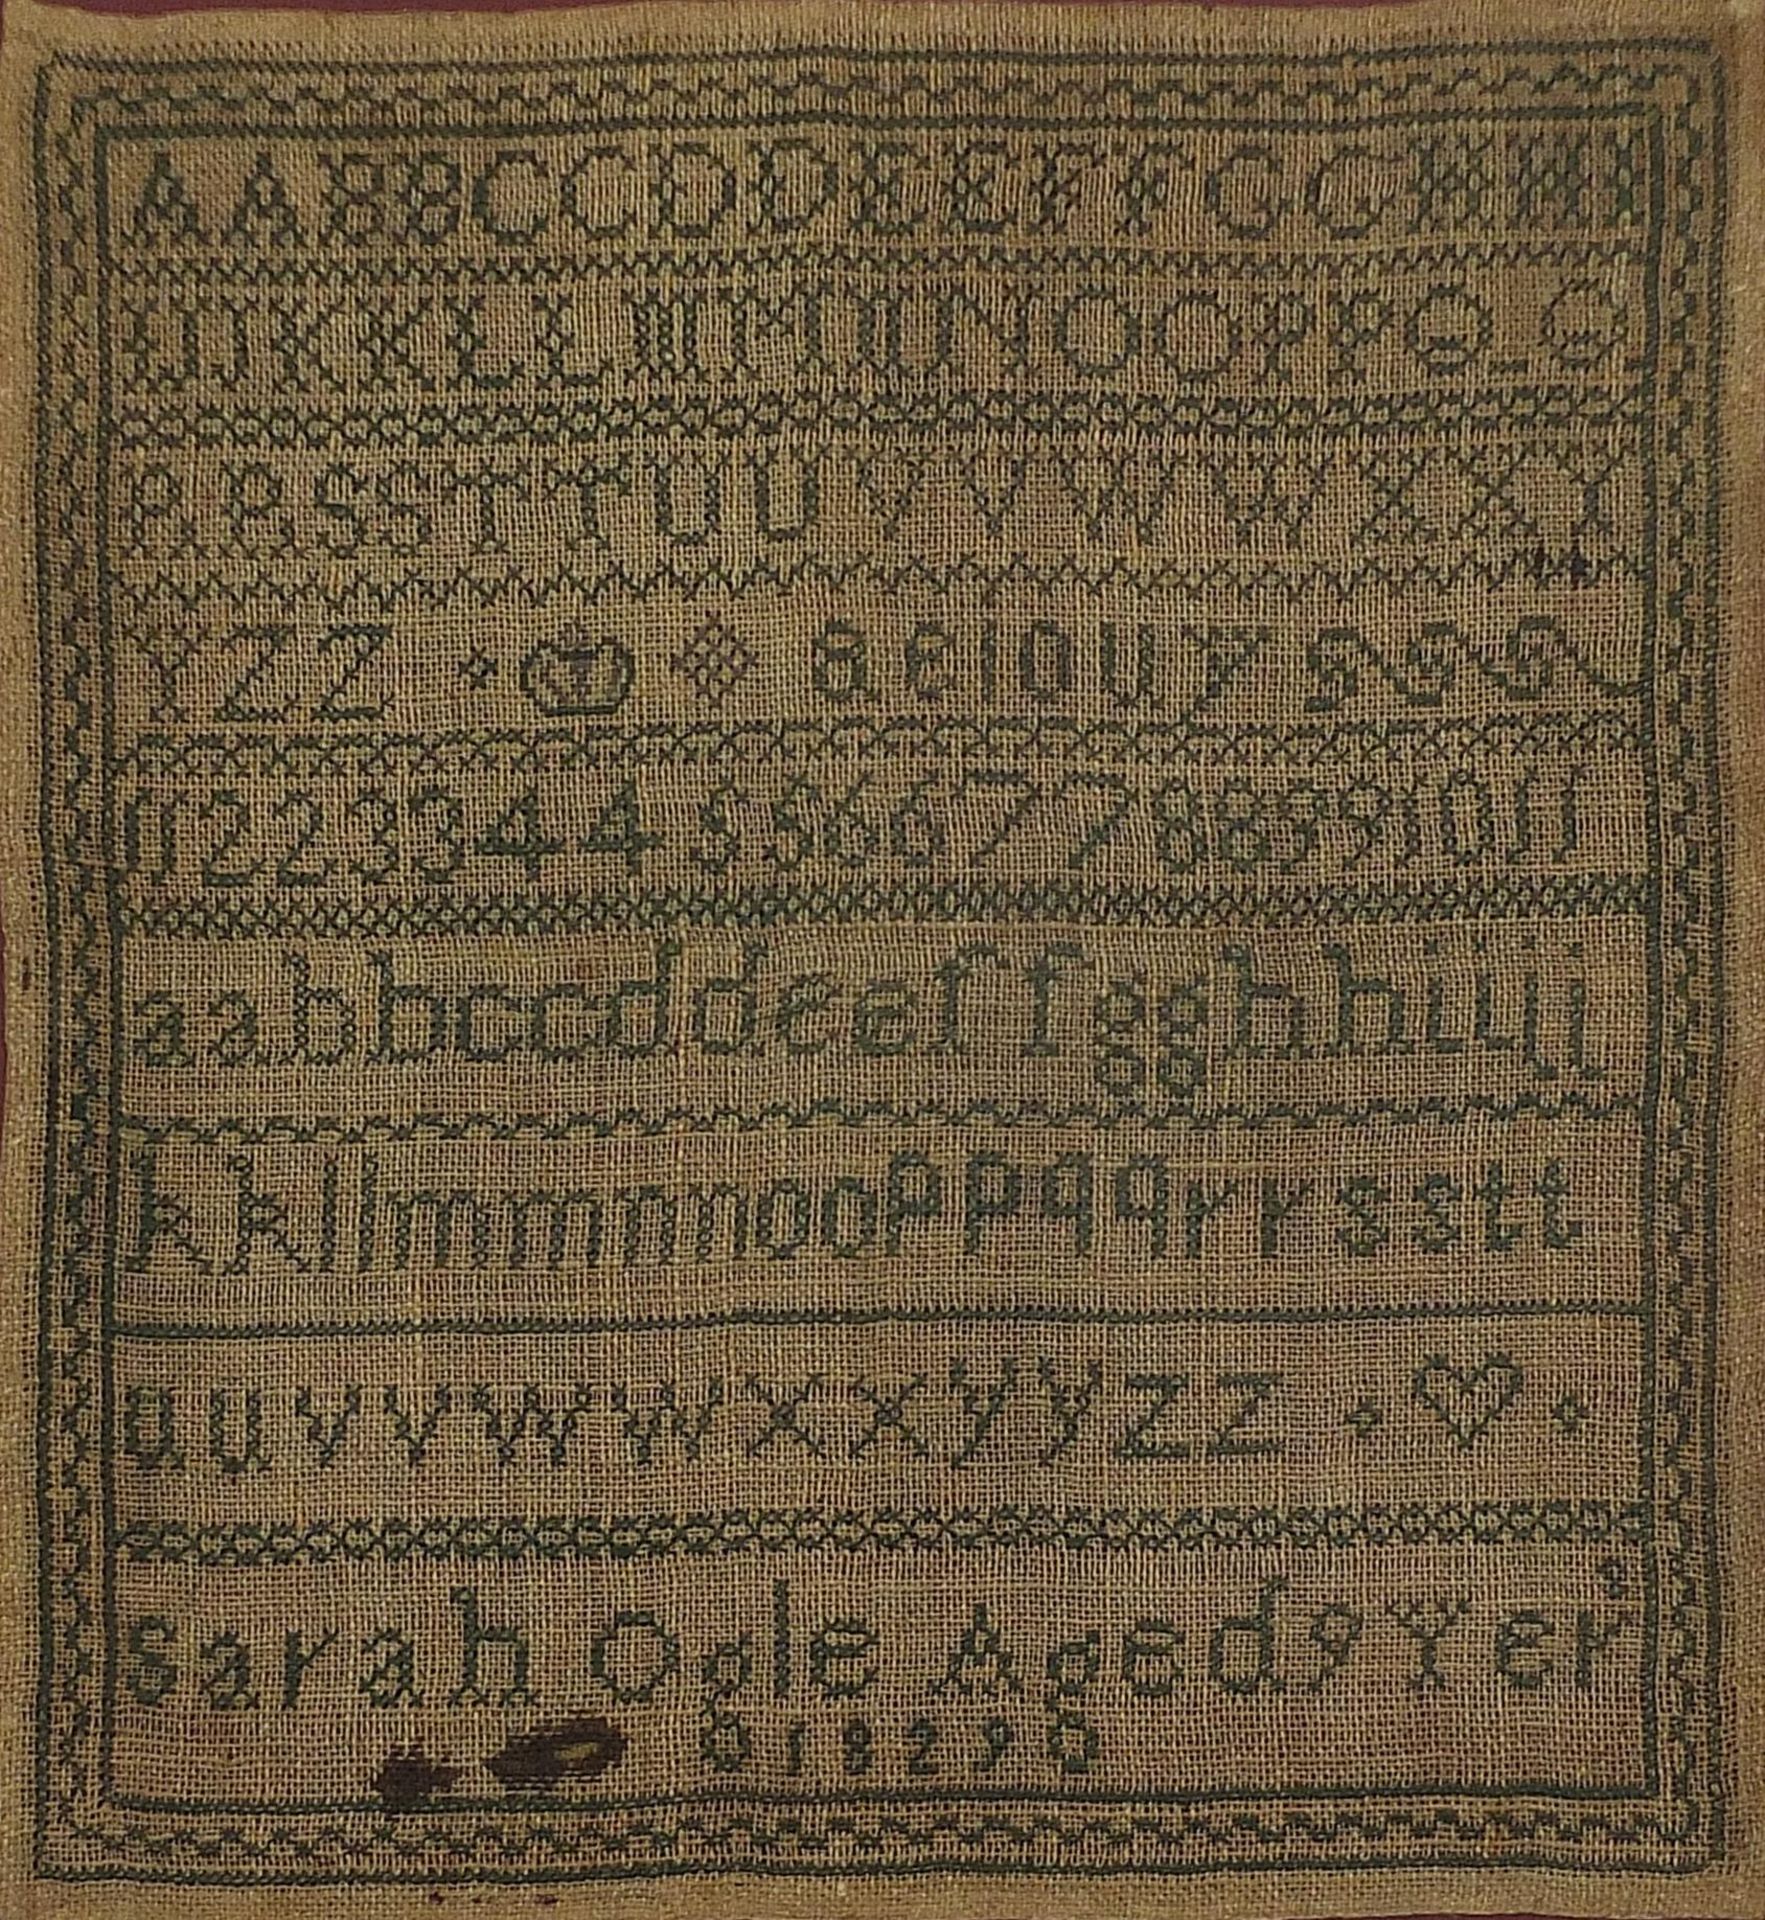 Early 19th century embroidered alphabet sampler worked by Sarah Ogle aged 9, 1829, framed and - Image 2 of 3